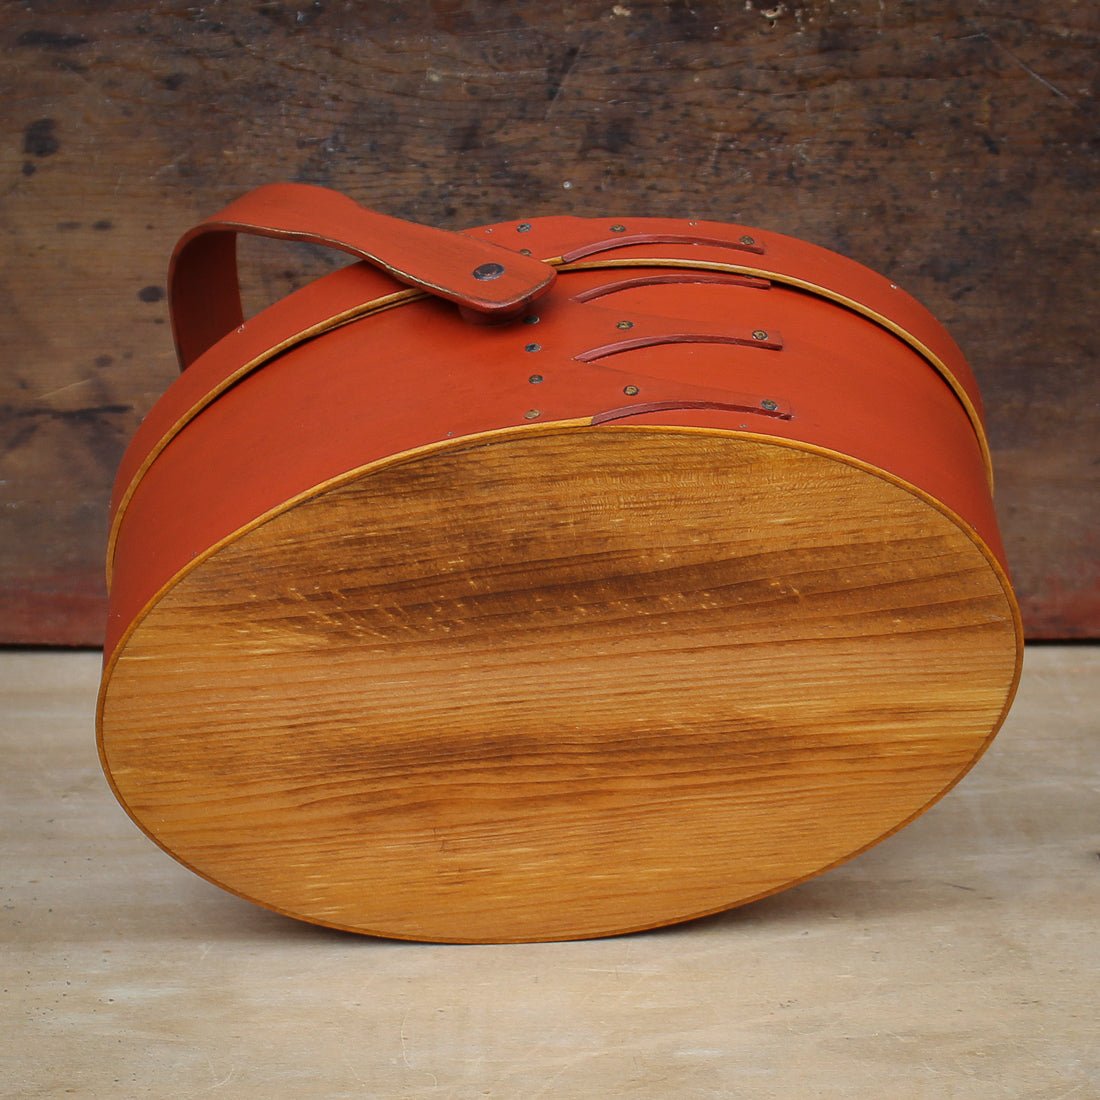 Shaker Style Swing Handle Carrier, LeHays Shaker Boxes, Handcrafted in Maine, Bottom View